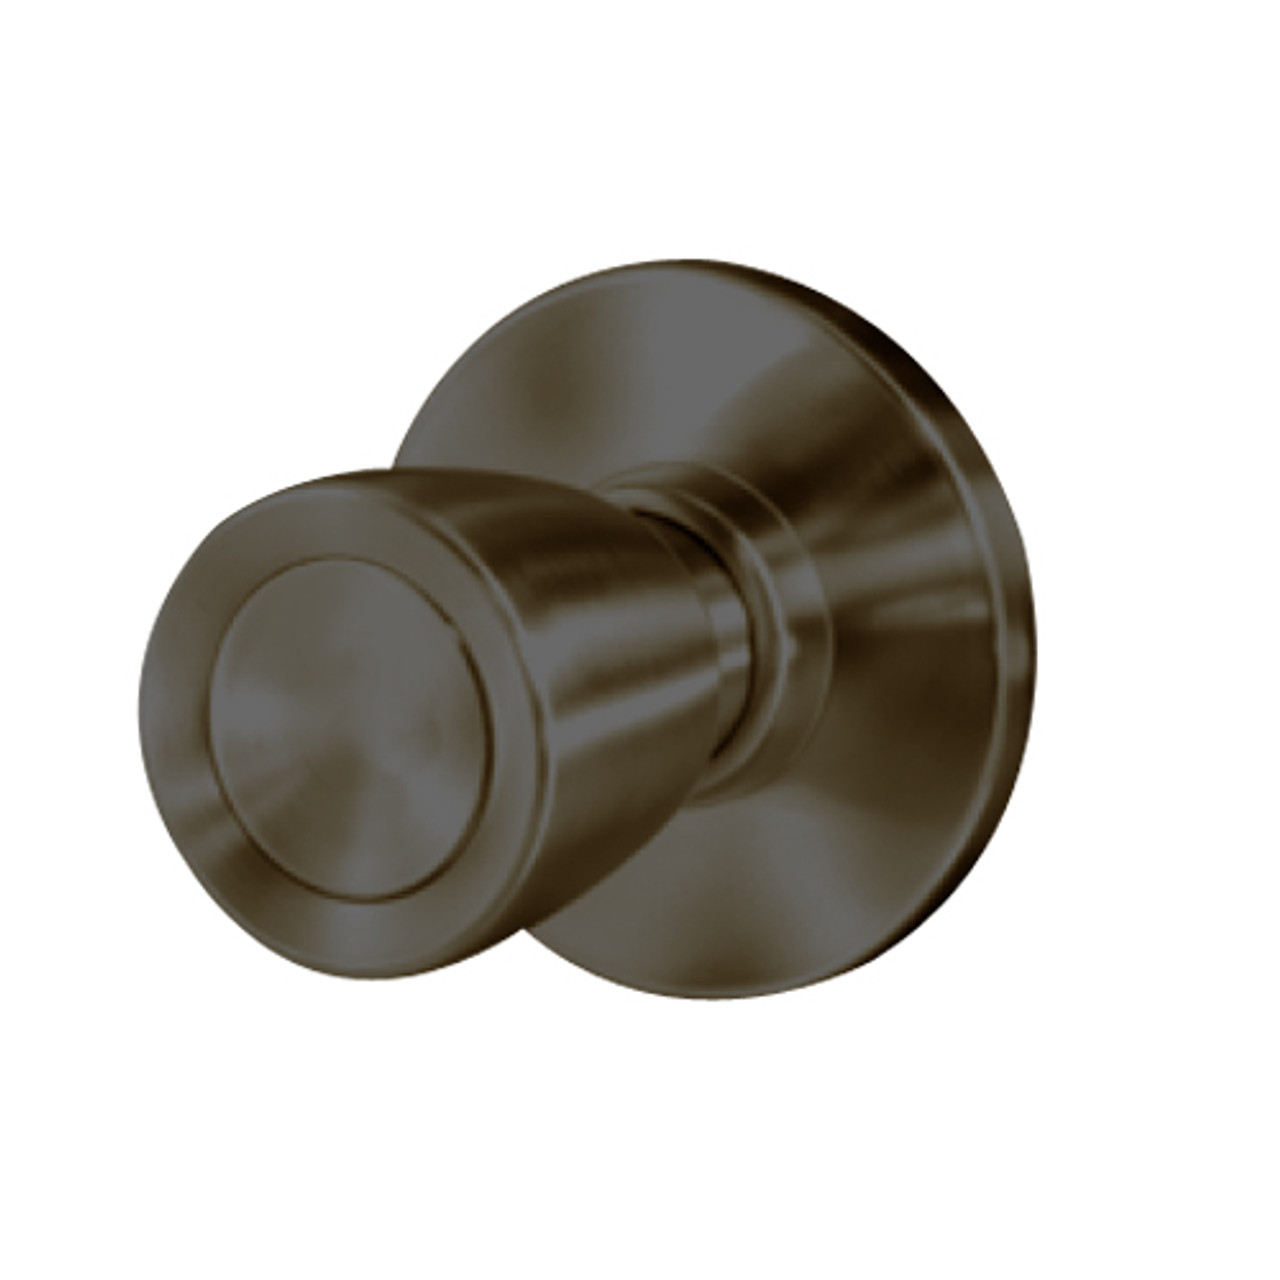 8K30Q6ASTK613 Best 8K Series Exit Heavy Duty Cylindrical Knob Locks with Tulip Style in Oil Rubbed Bronze